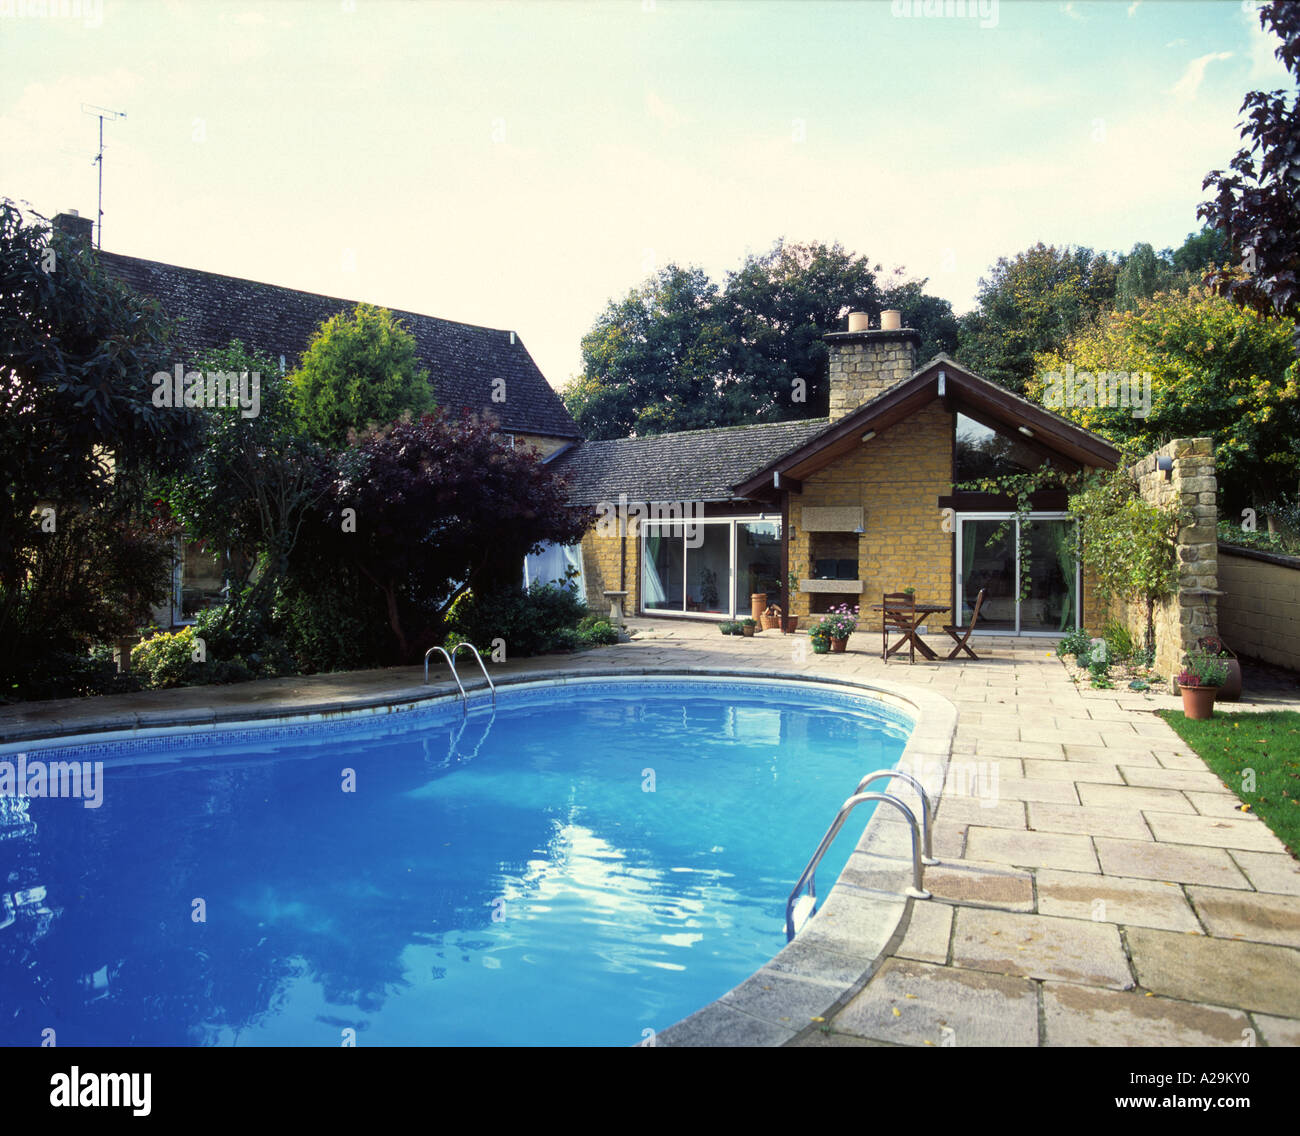 Outdoor swimming pool in grounds of house Stock Photo